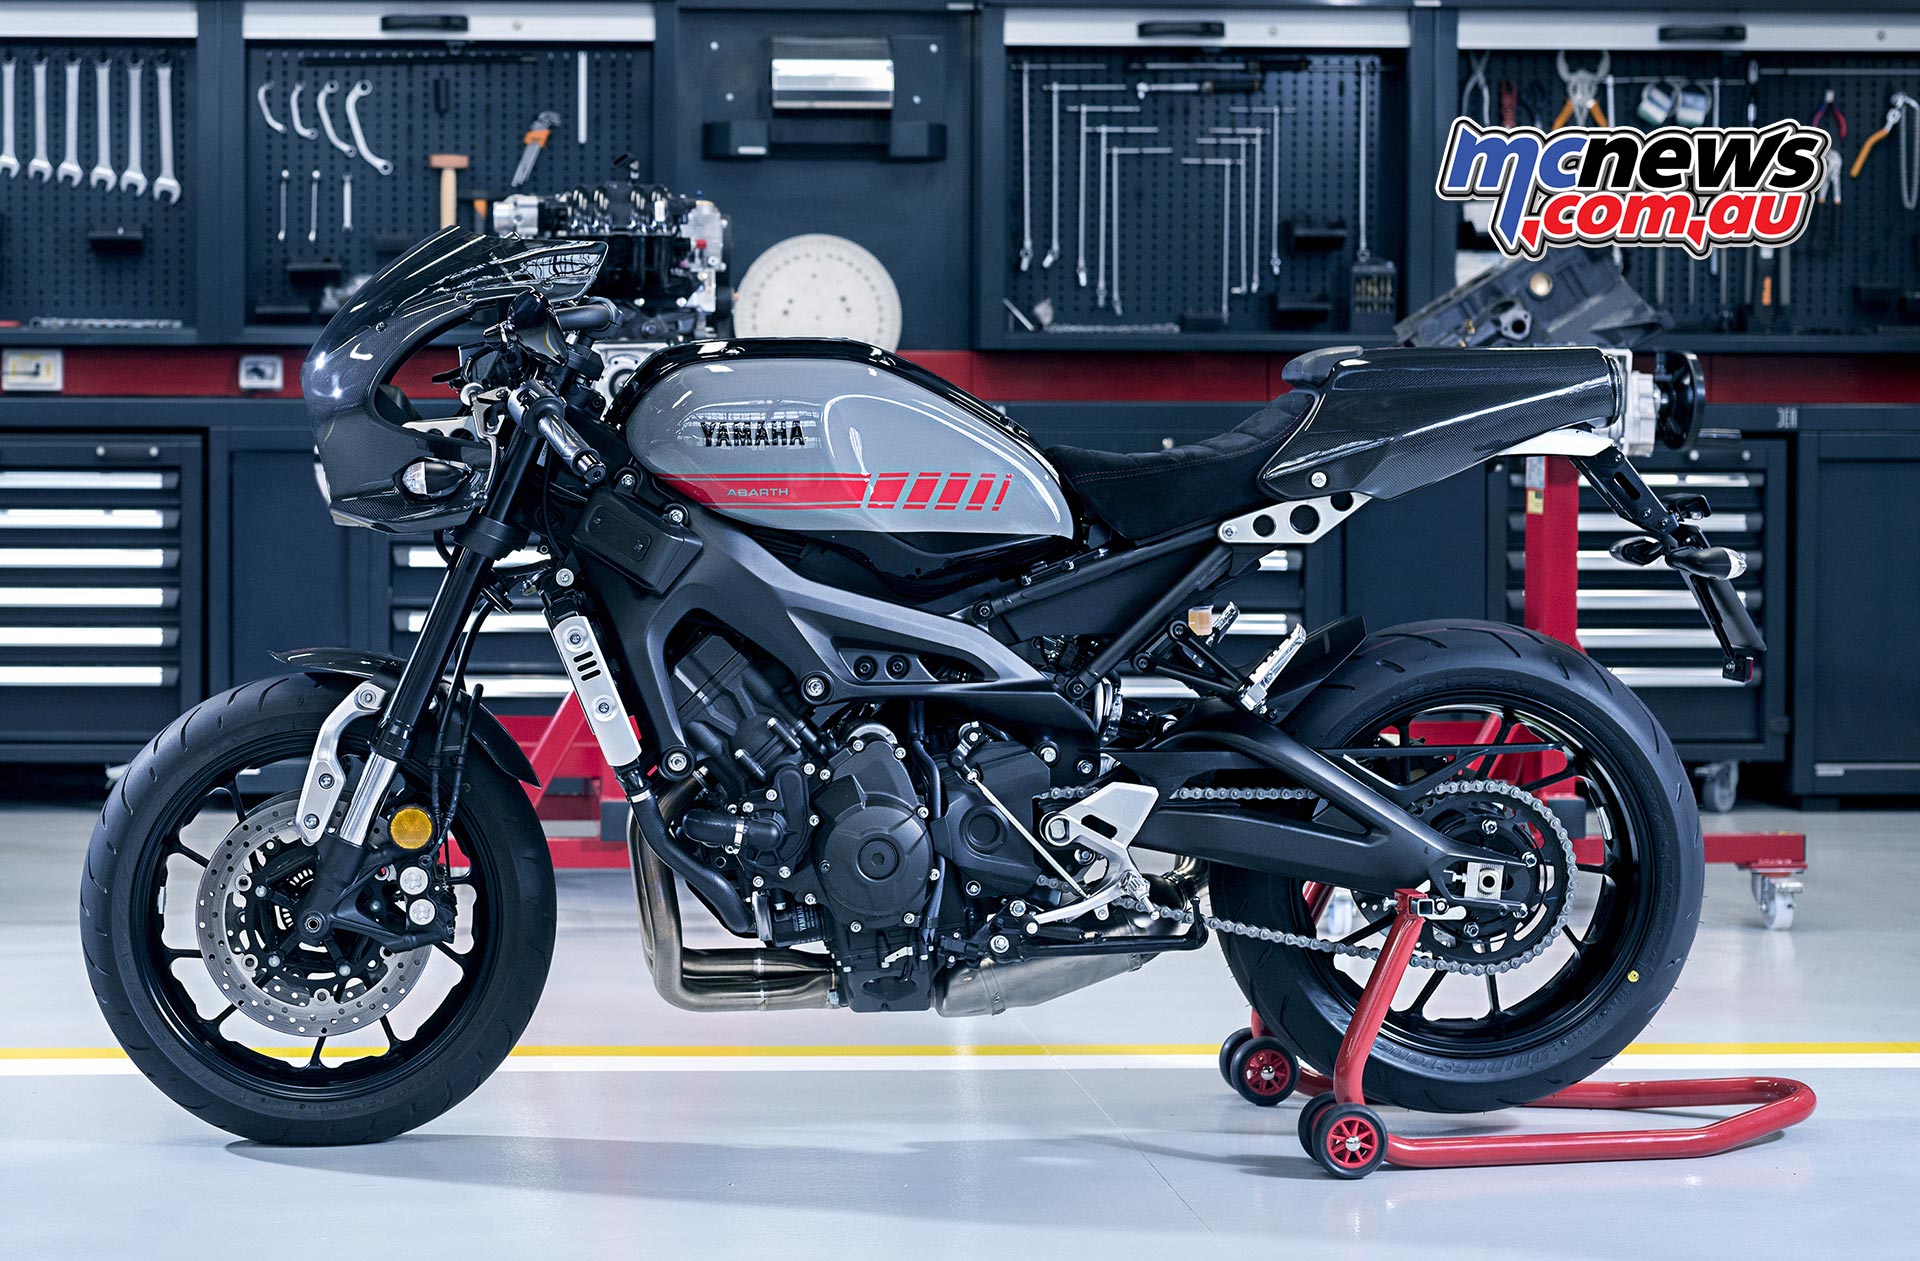 Limited Edition Yamaha Xsr900 Abarth Unveiled Motorcycle News Sport And Reviews